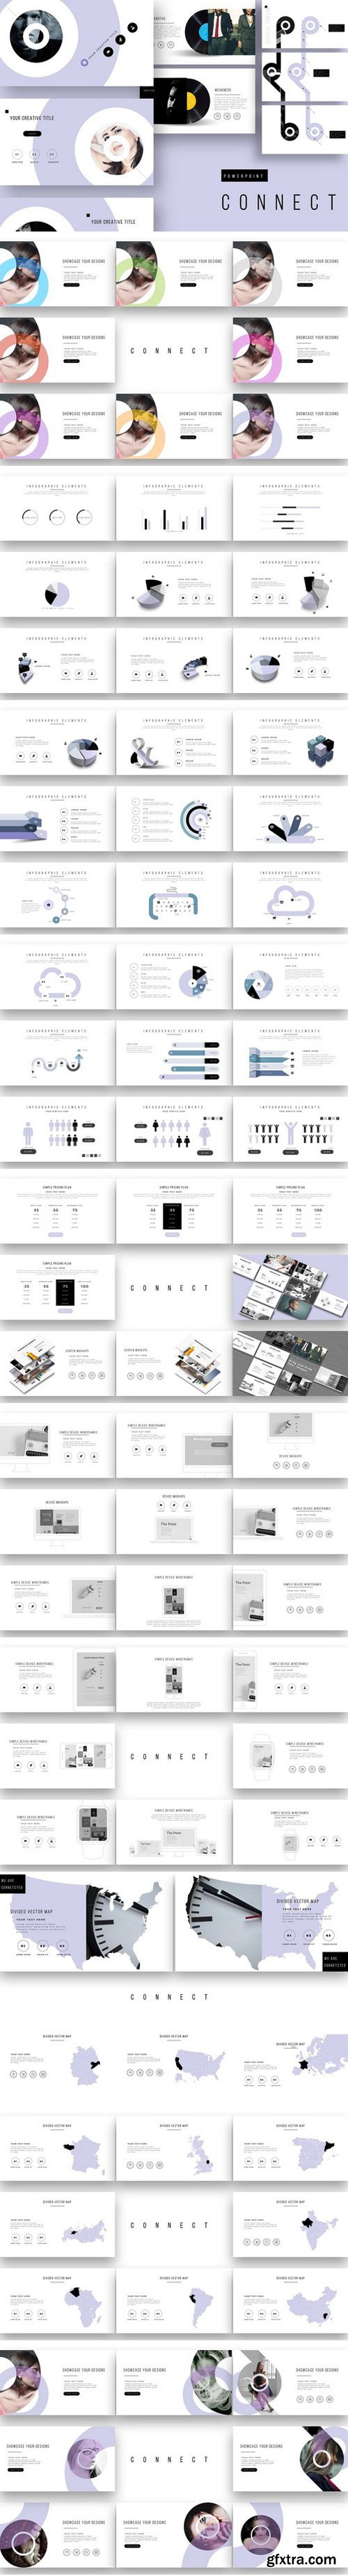 CM - CONNECT PowerPoint Template + Update 2136668